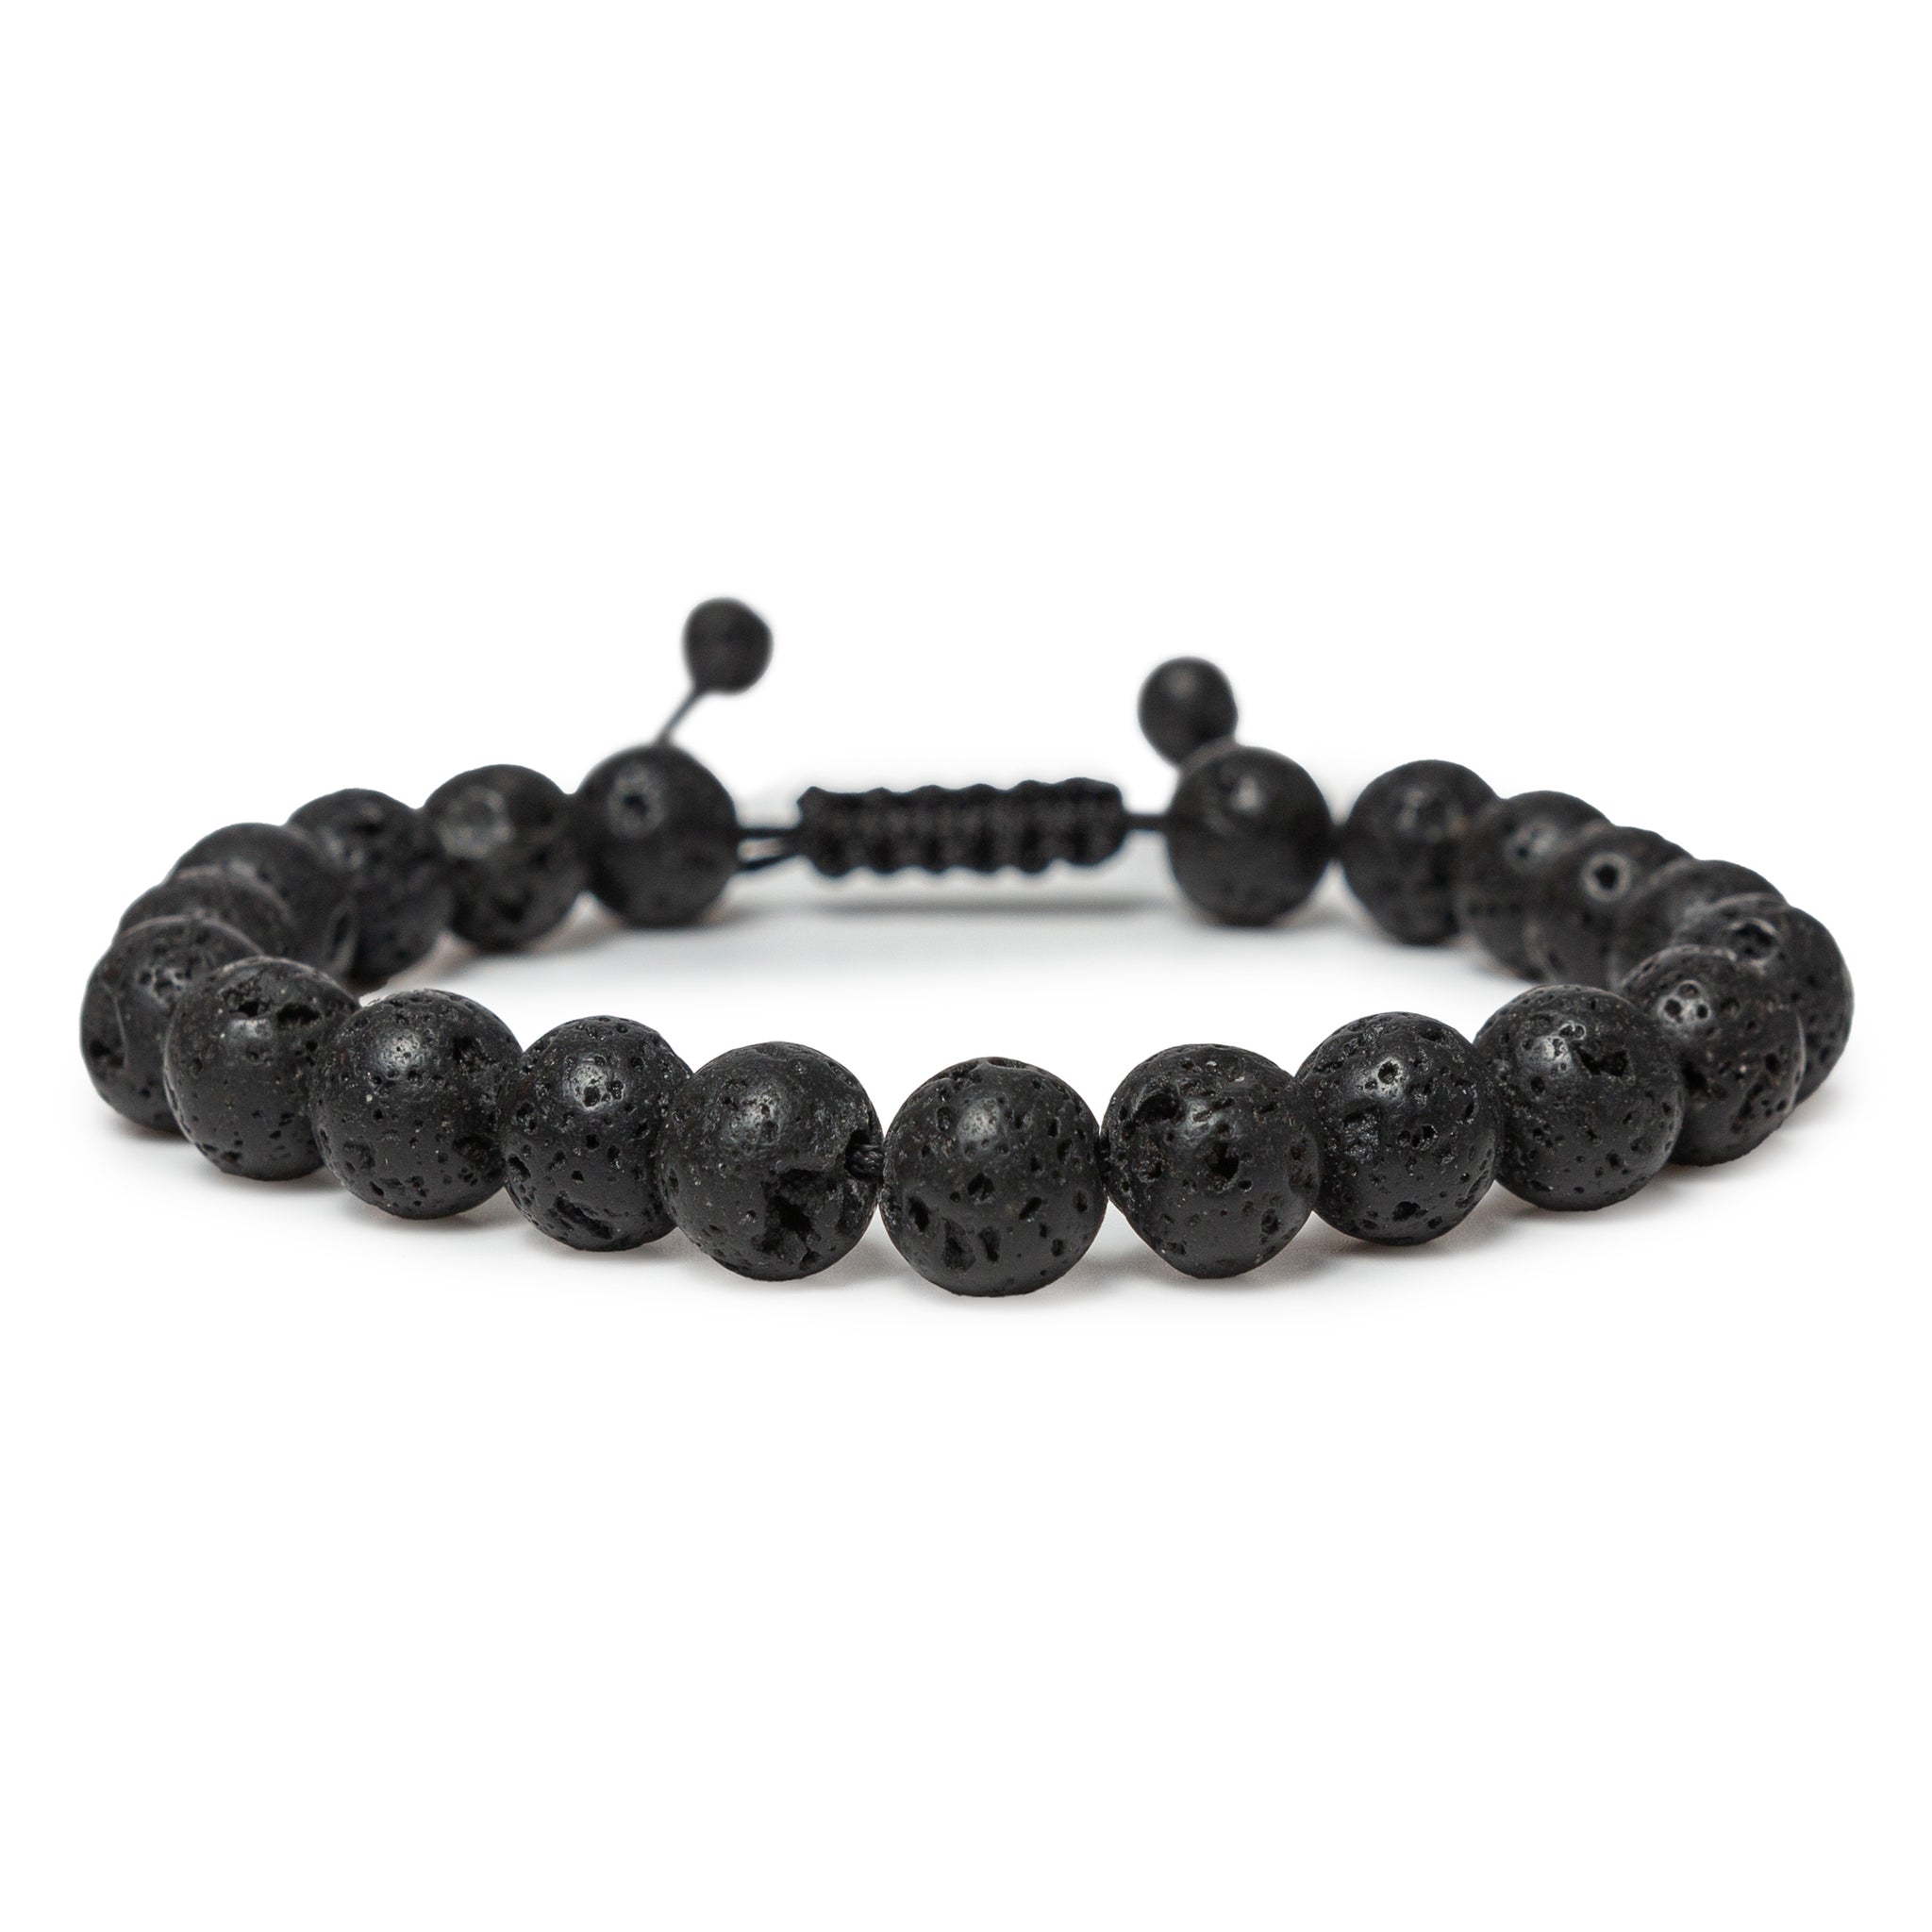 Natural Lava Adjustable Bracelet for Men and Woman - The Stone of protection